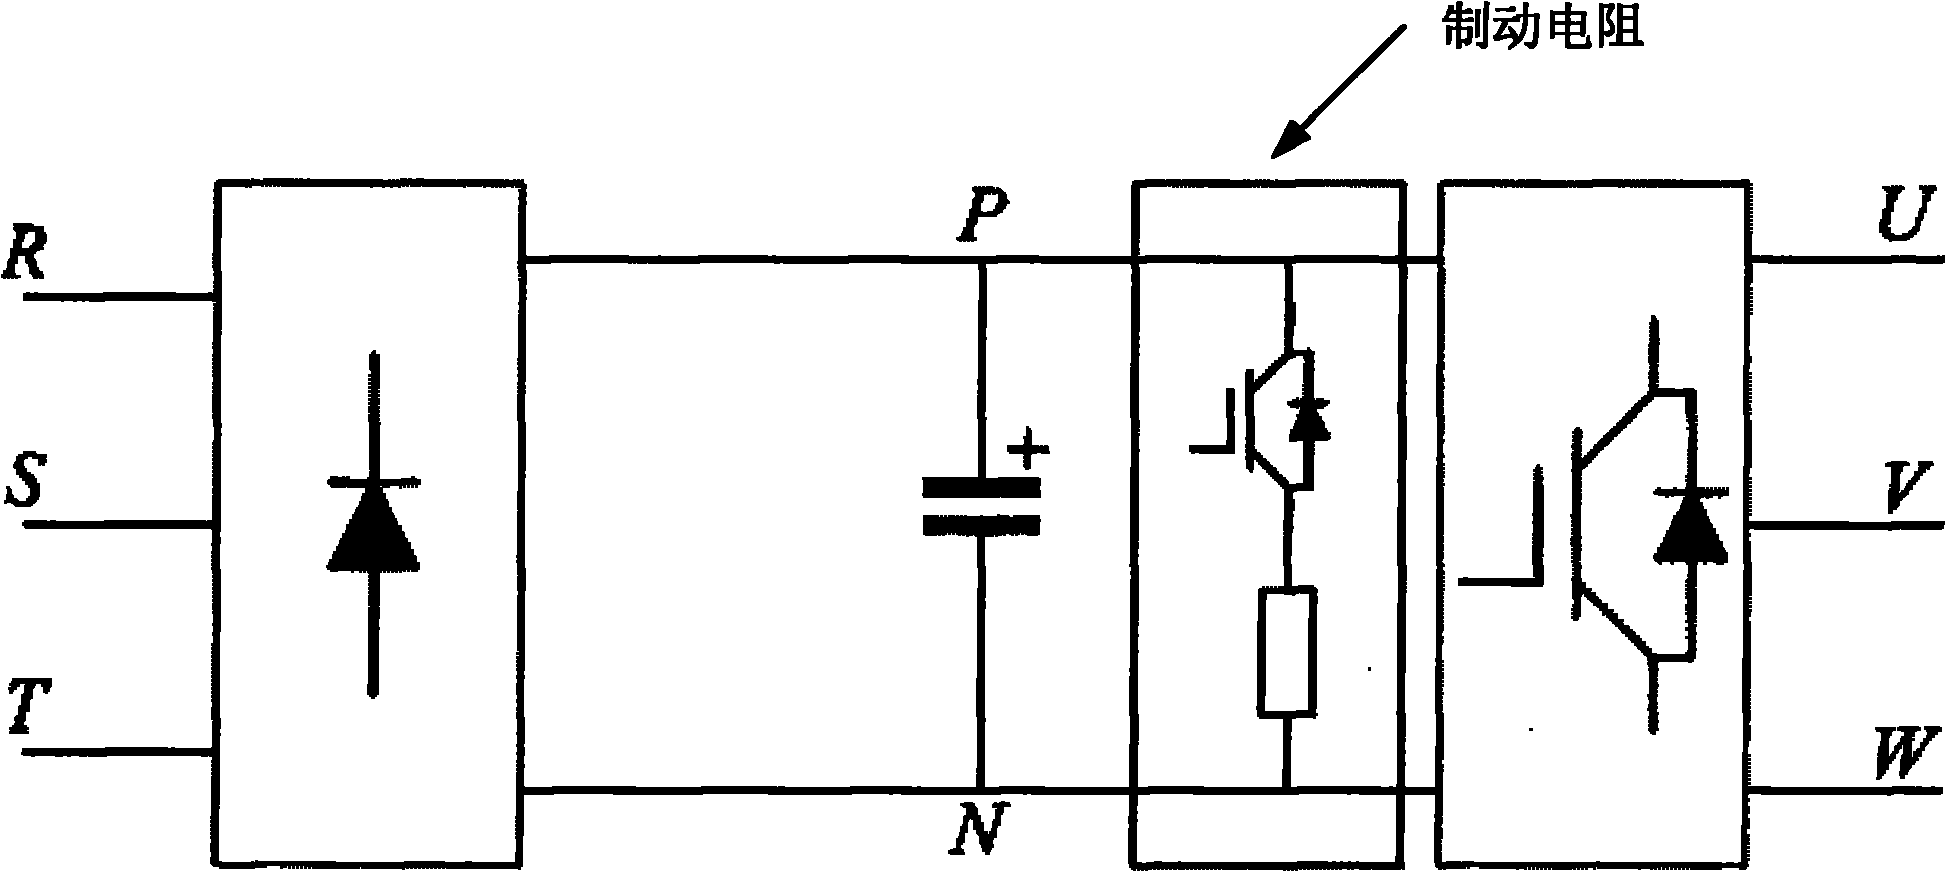 Alternating current-direct current (AC-DC) converter and frequency converter